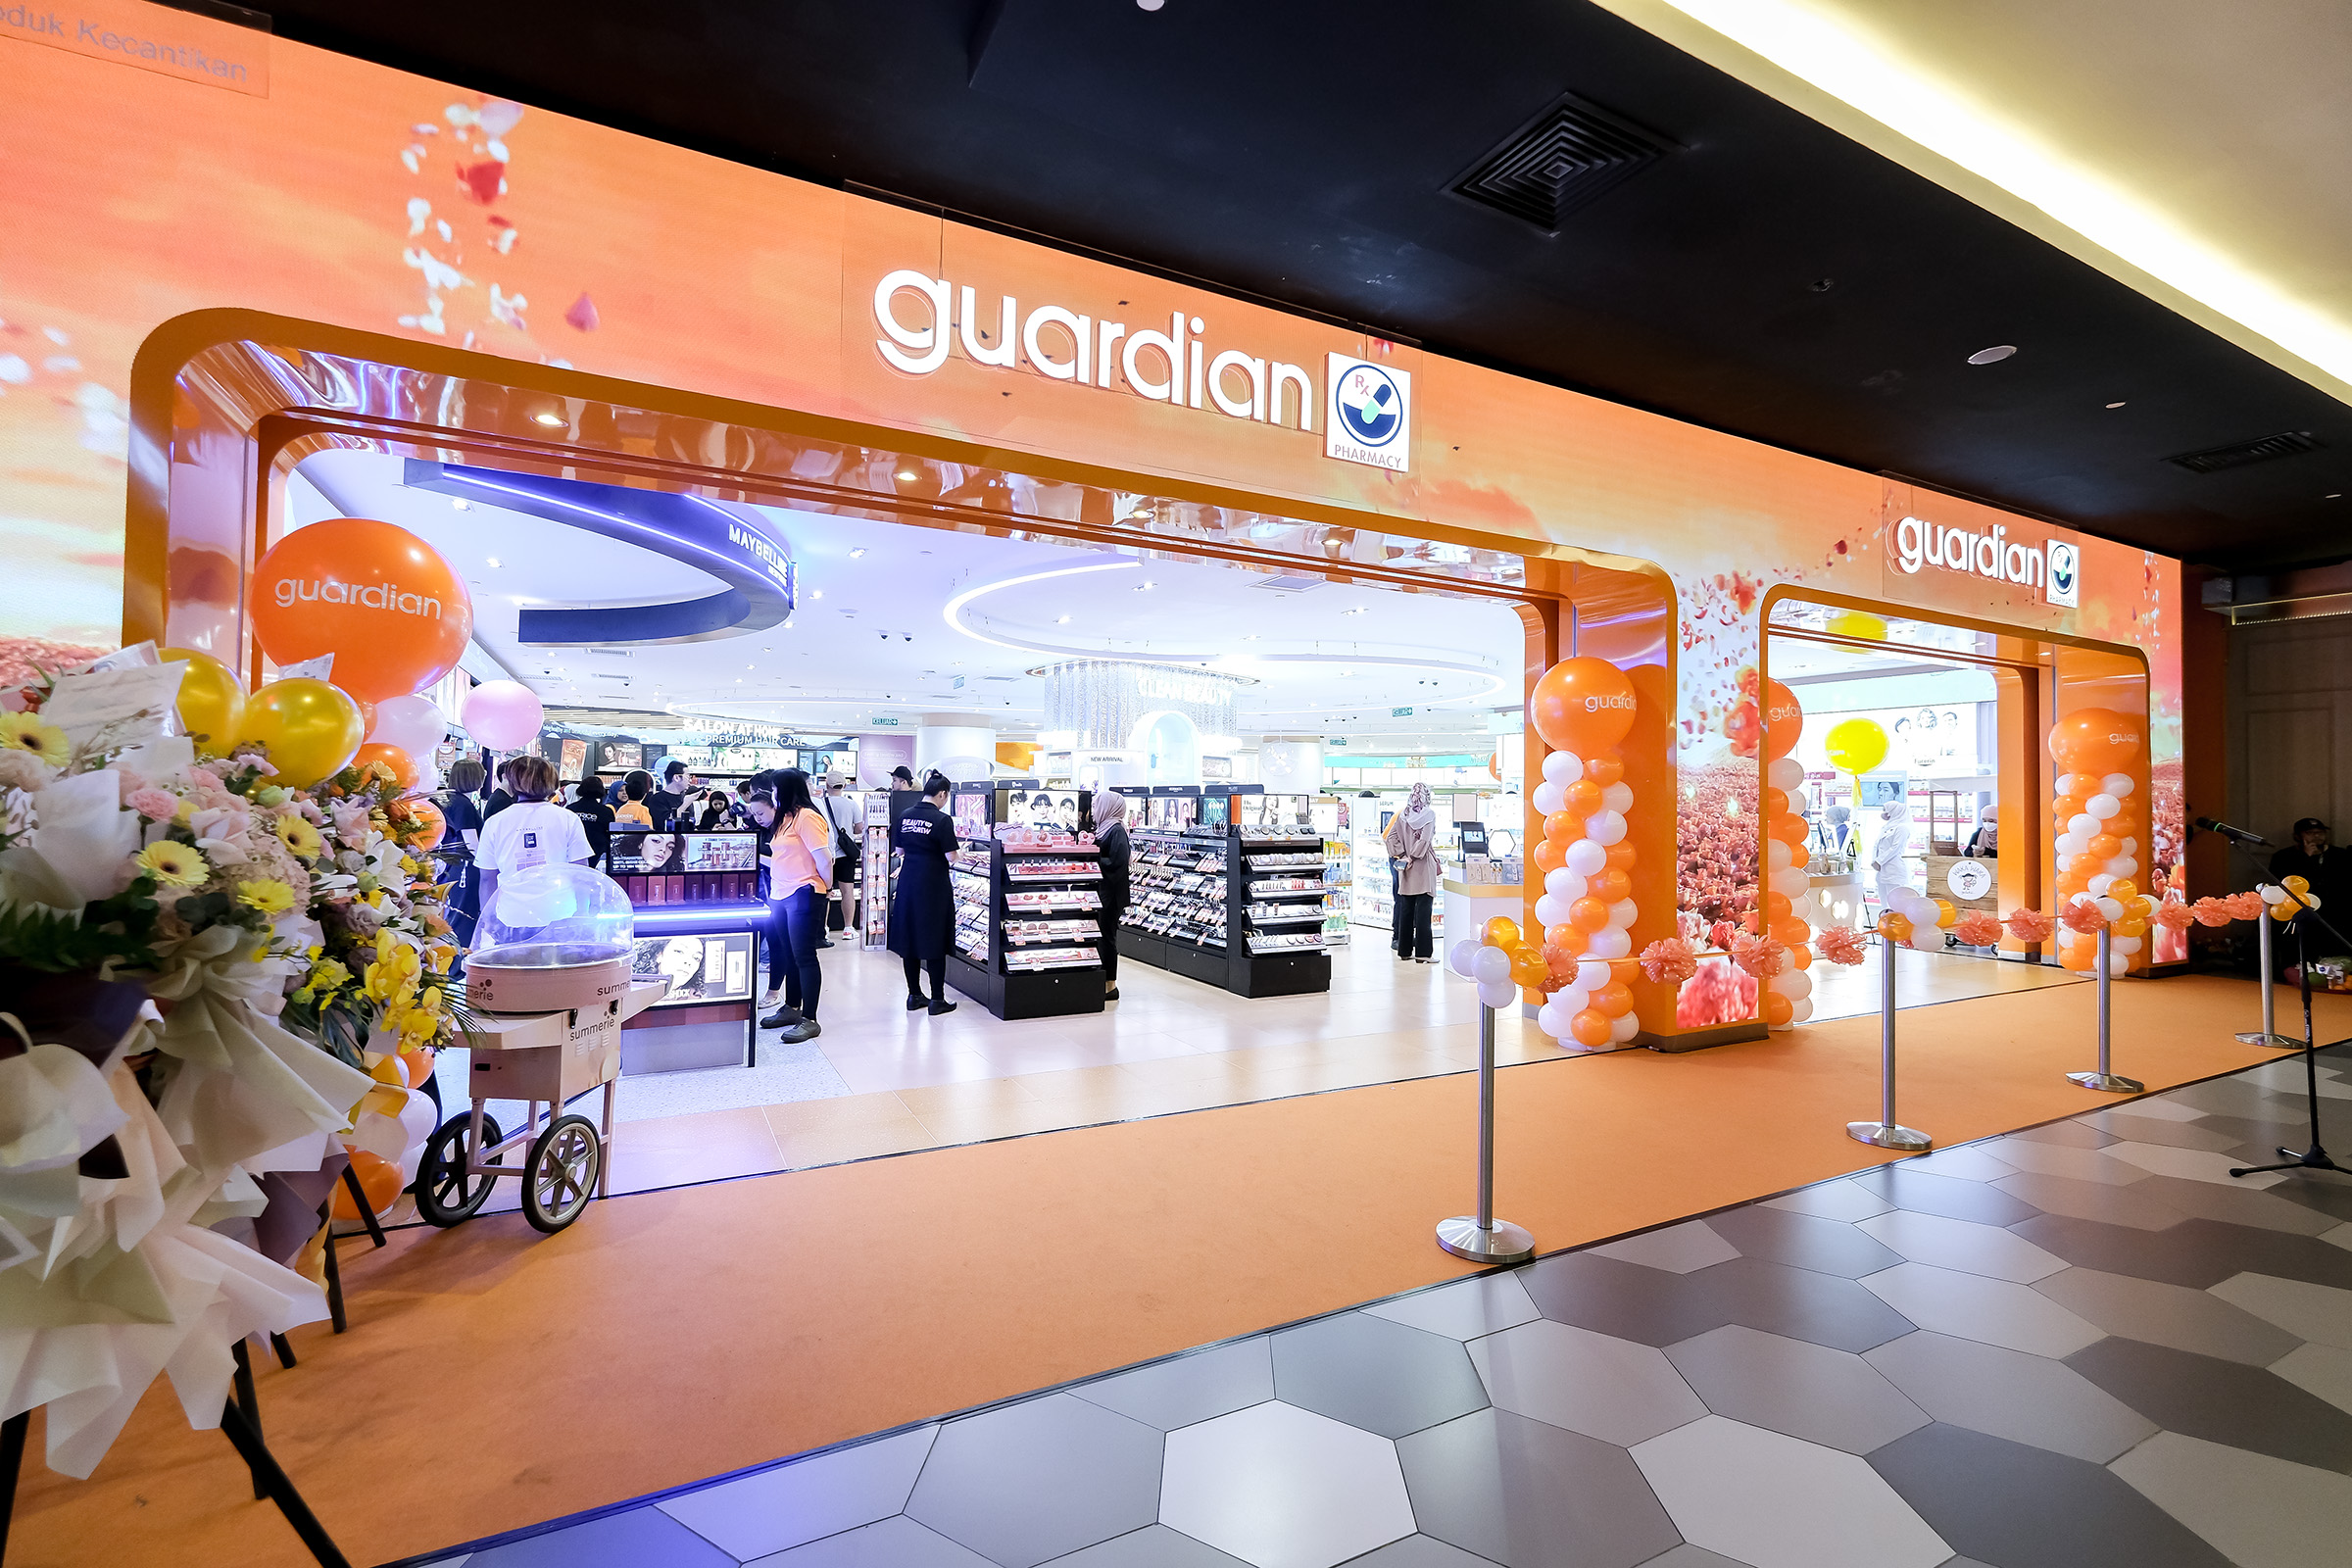 Guardian malaysia's new flagship store at mid valley kl